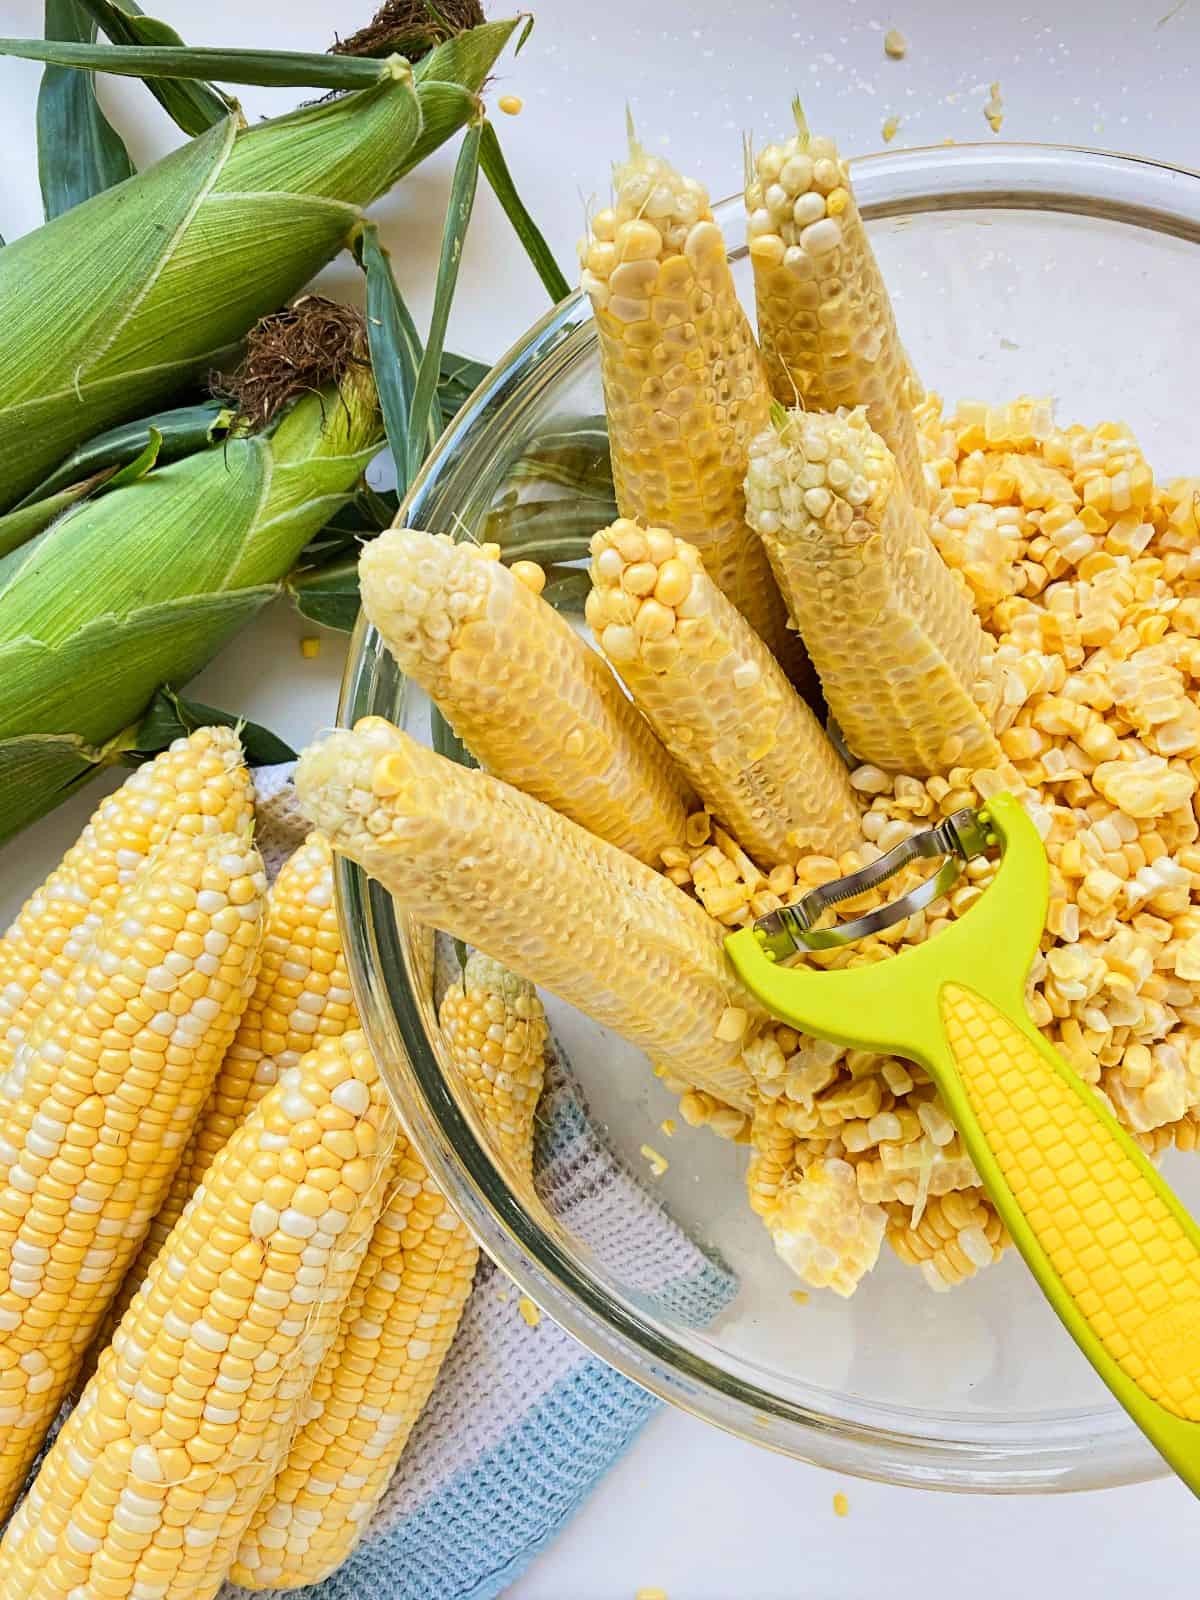 An image of fresh corn, corn that has been shucked, and a bowl containing striped cobs and their corn kernels alongside a corn zipper gadget.